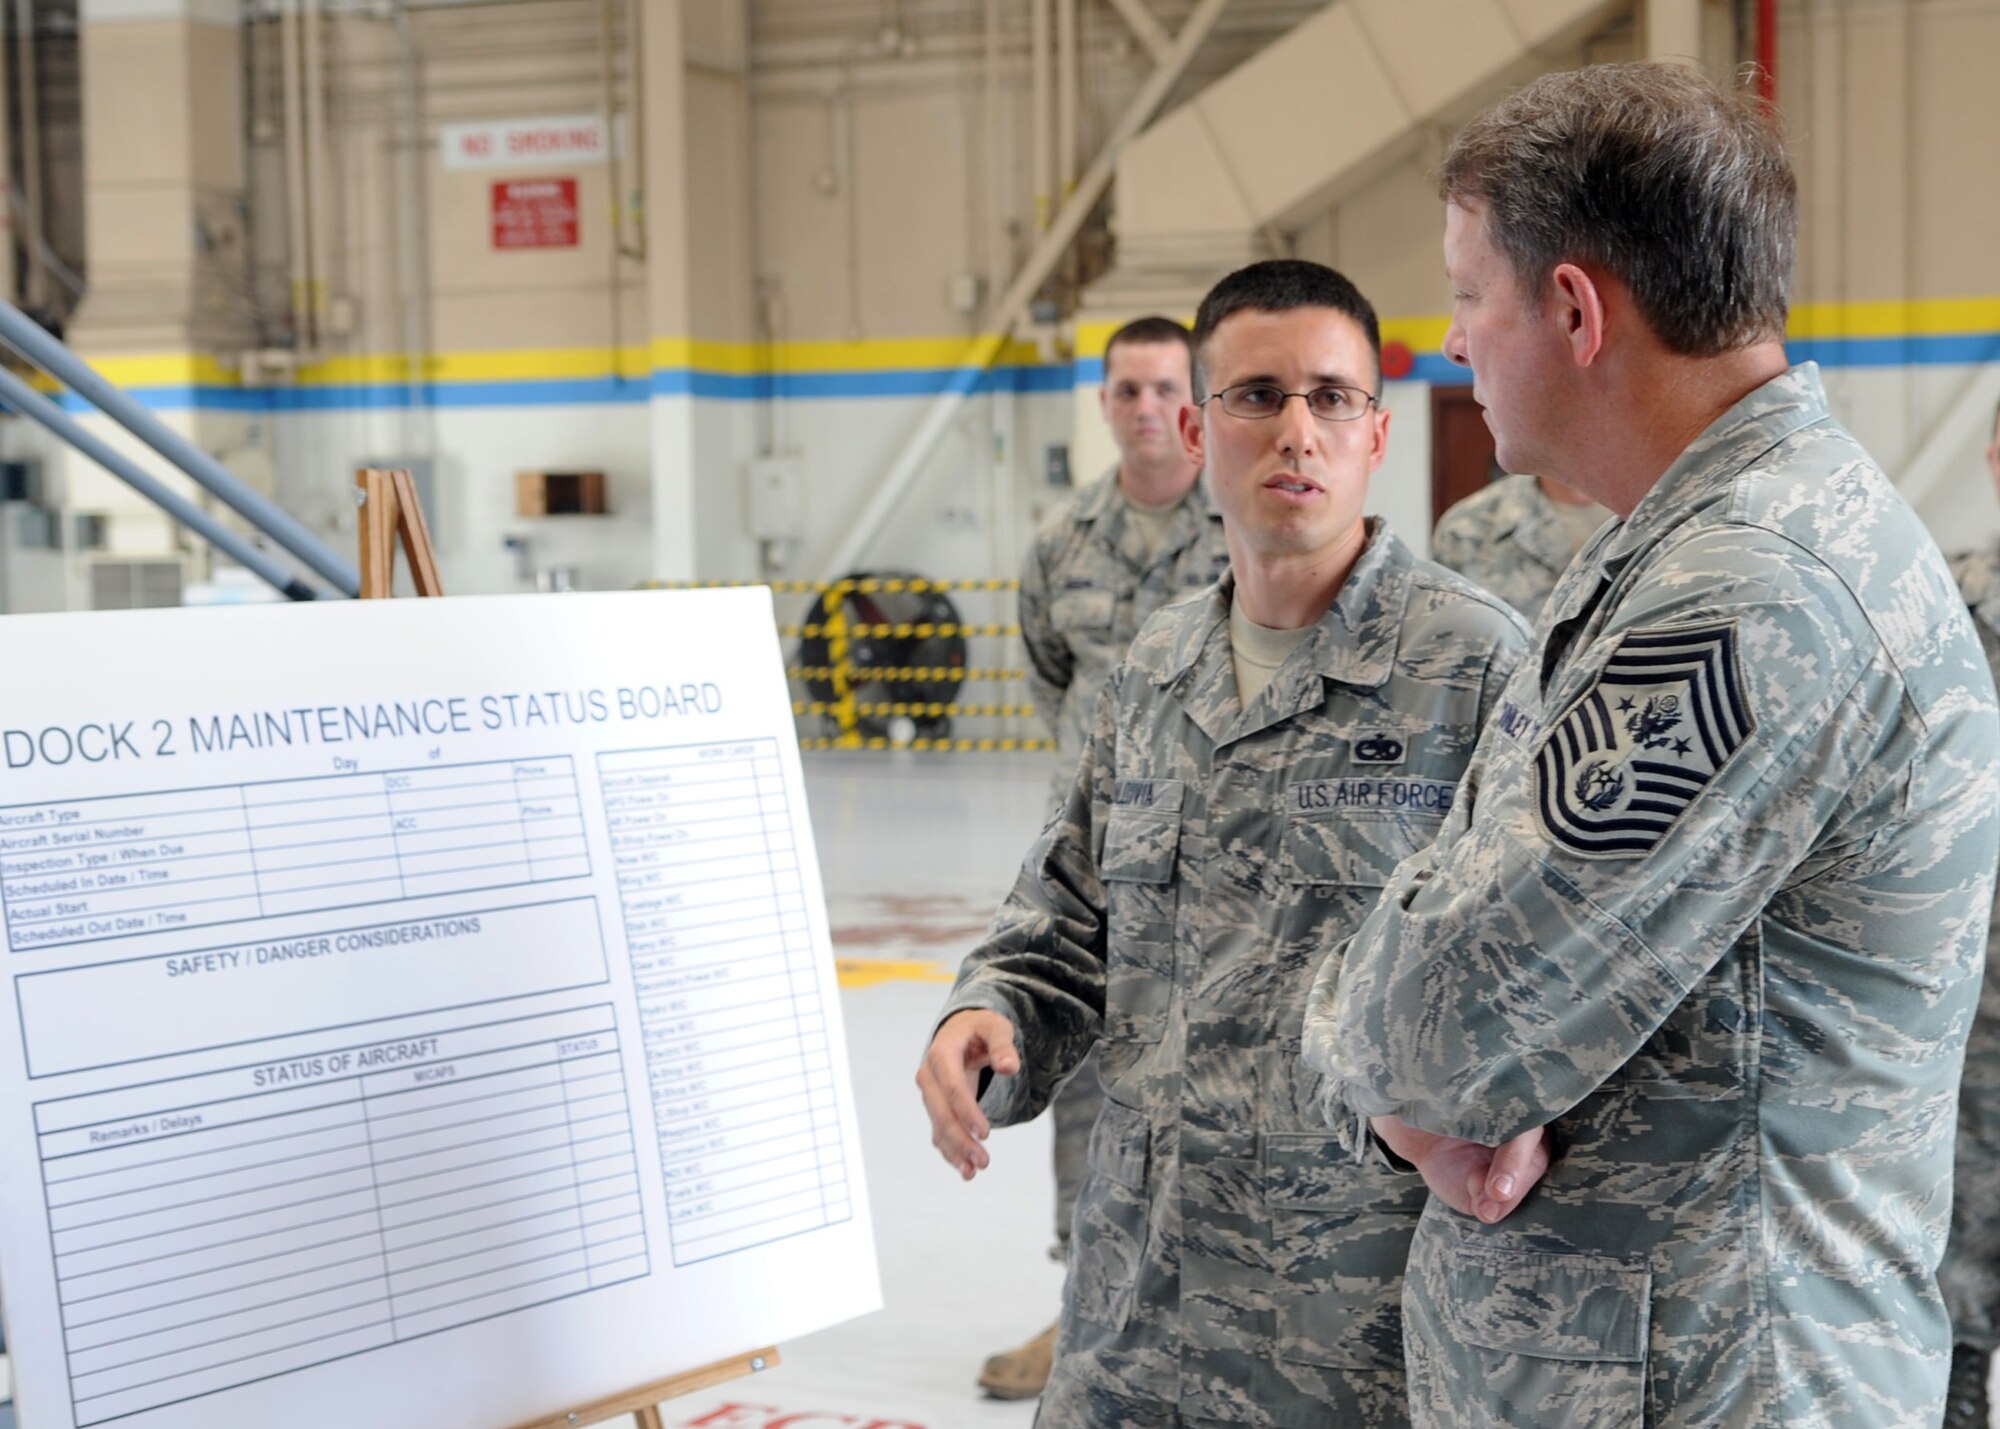 Staff Sgt. Justin Baldivia, 4th Equipment Maintenance Squadron, explains hydraulic purification capabilities for the F-15E Strike Eagle to Chief Master Sgt. of the Air Force Rodney McKinley on Seymour Johnson Air Force Base, N.C., June 12, 2009. Chief McKinley is the 15th CMSAF and serves as adviser to the Chief of Staff and the Secretary of the Air Force on issues regarding the enlisted force. (U.S. Air Force photo by Senior Airman Makenzie Lang)